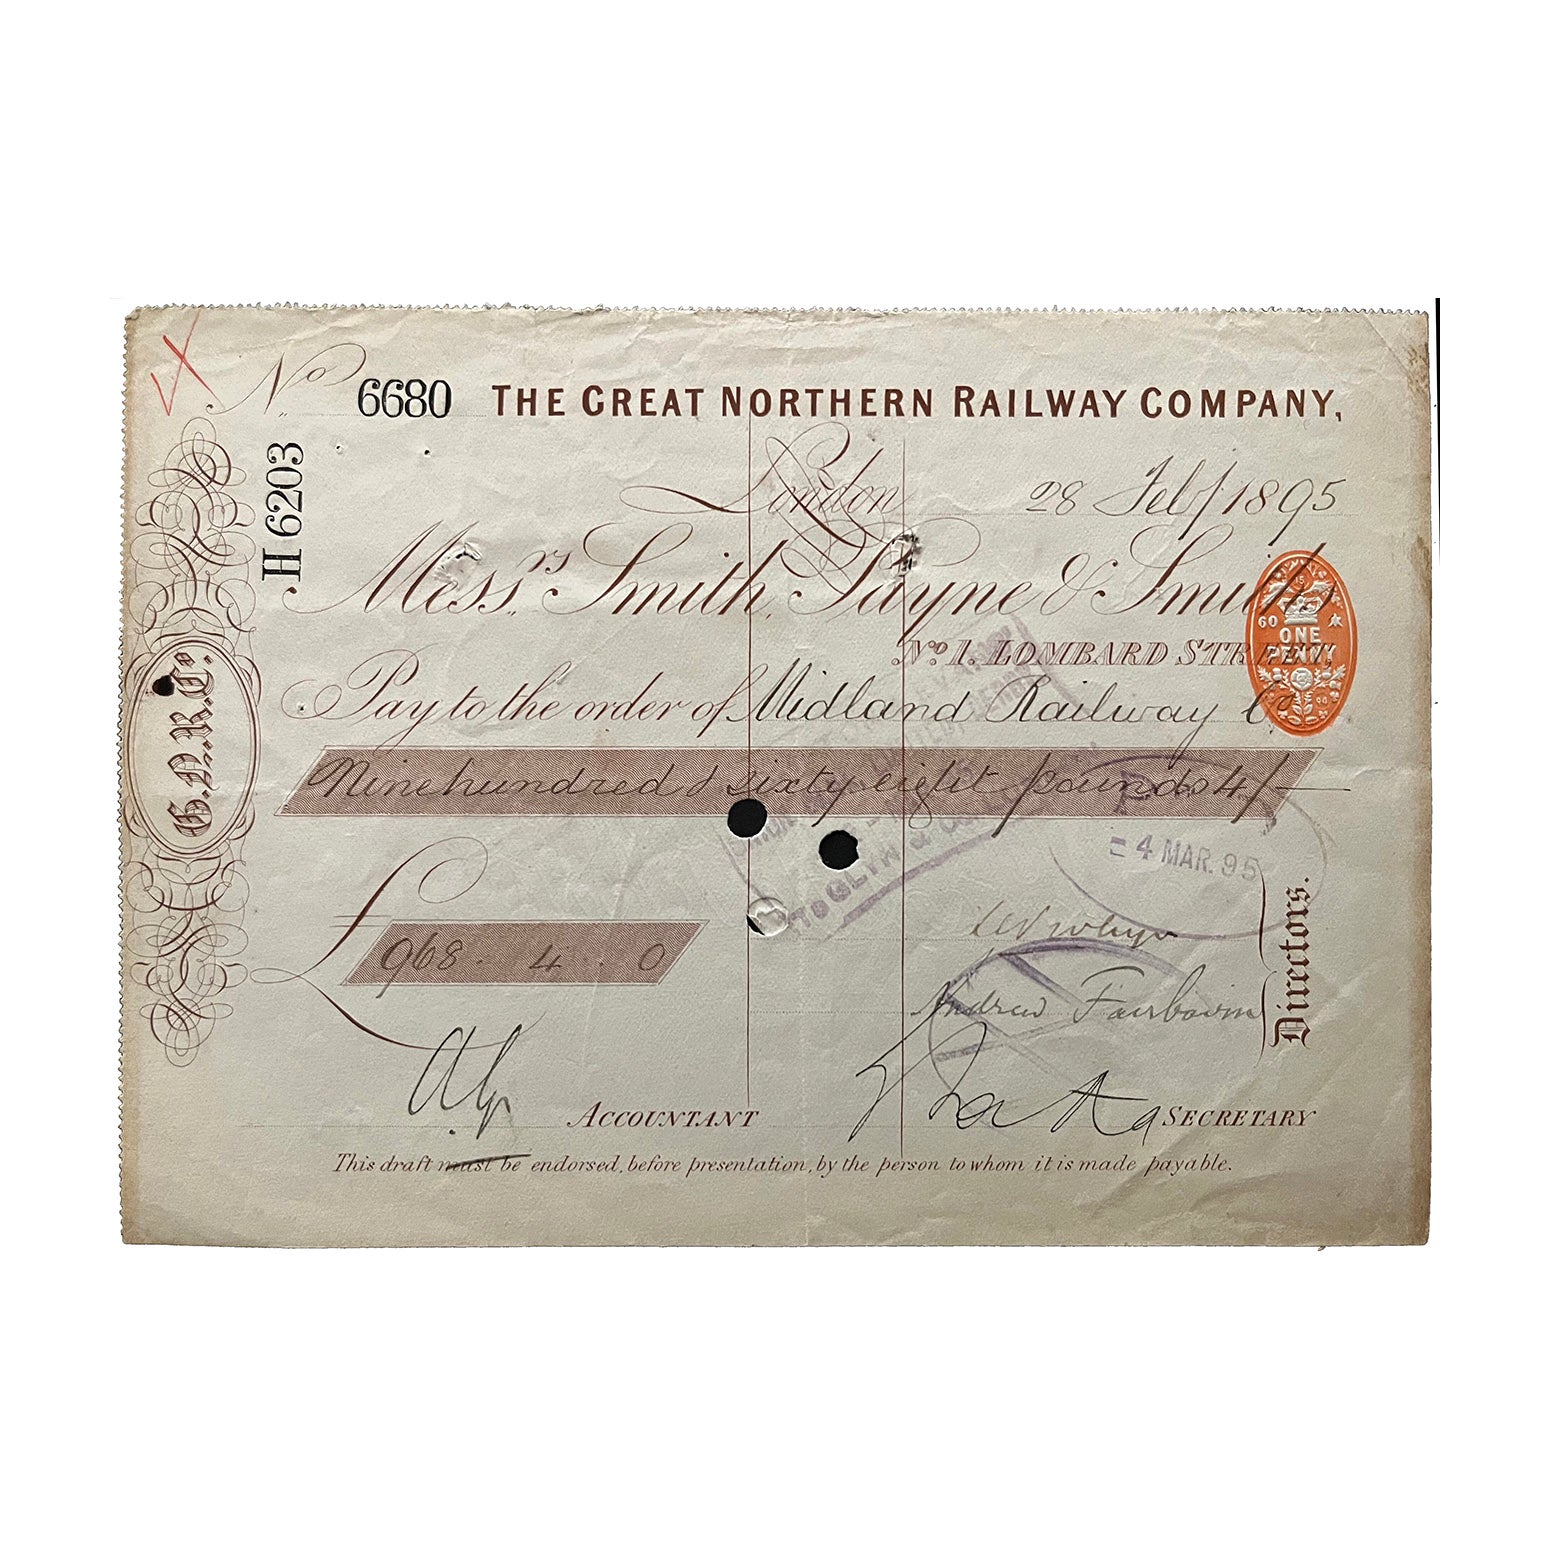 An original railway cheque, Great Northern Railway Company, for payment to the Midland Railway. Dated 28 February 1895